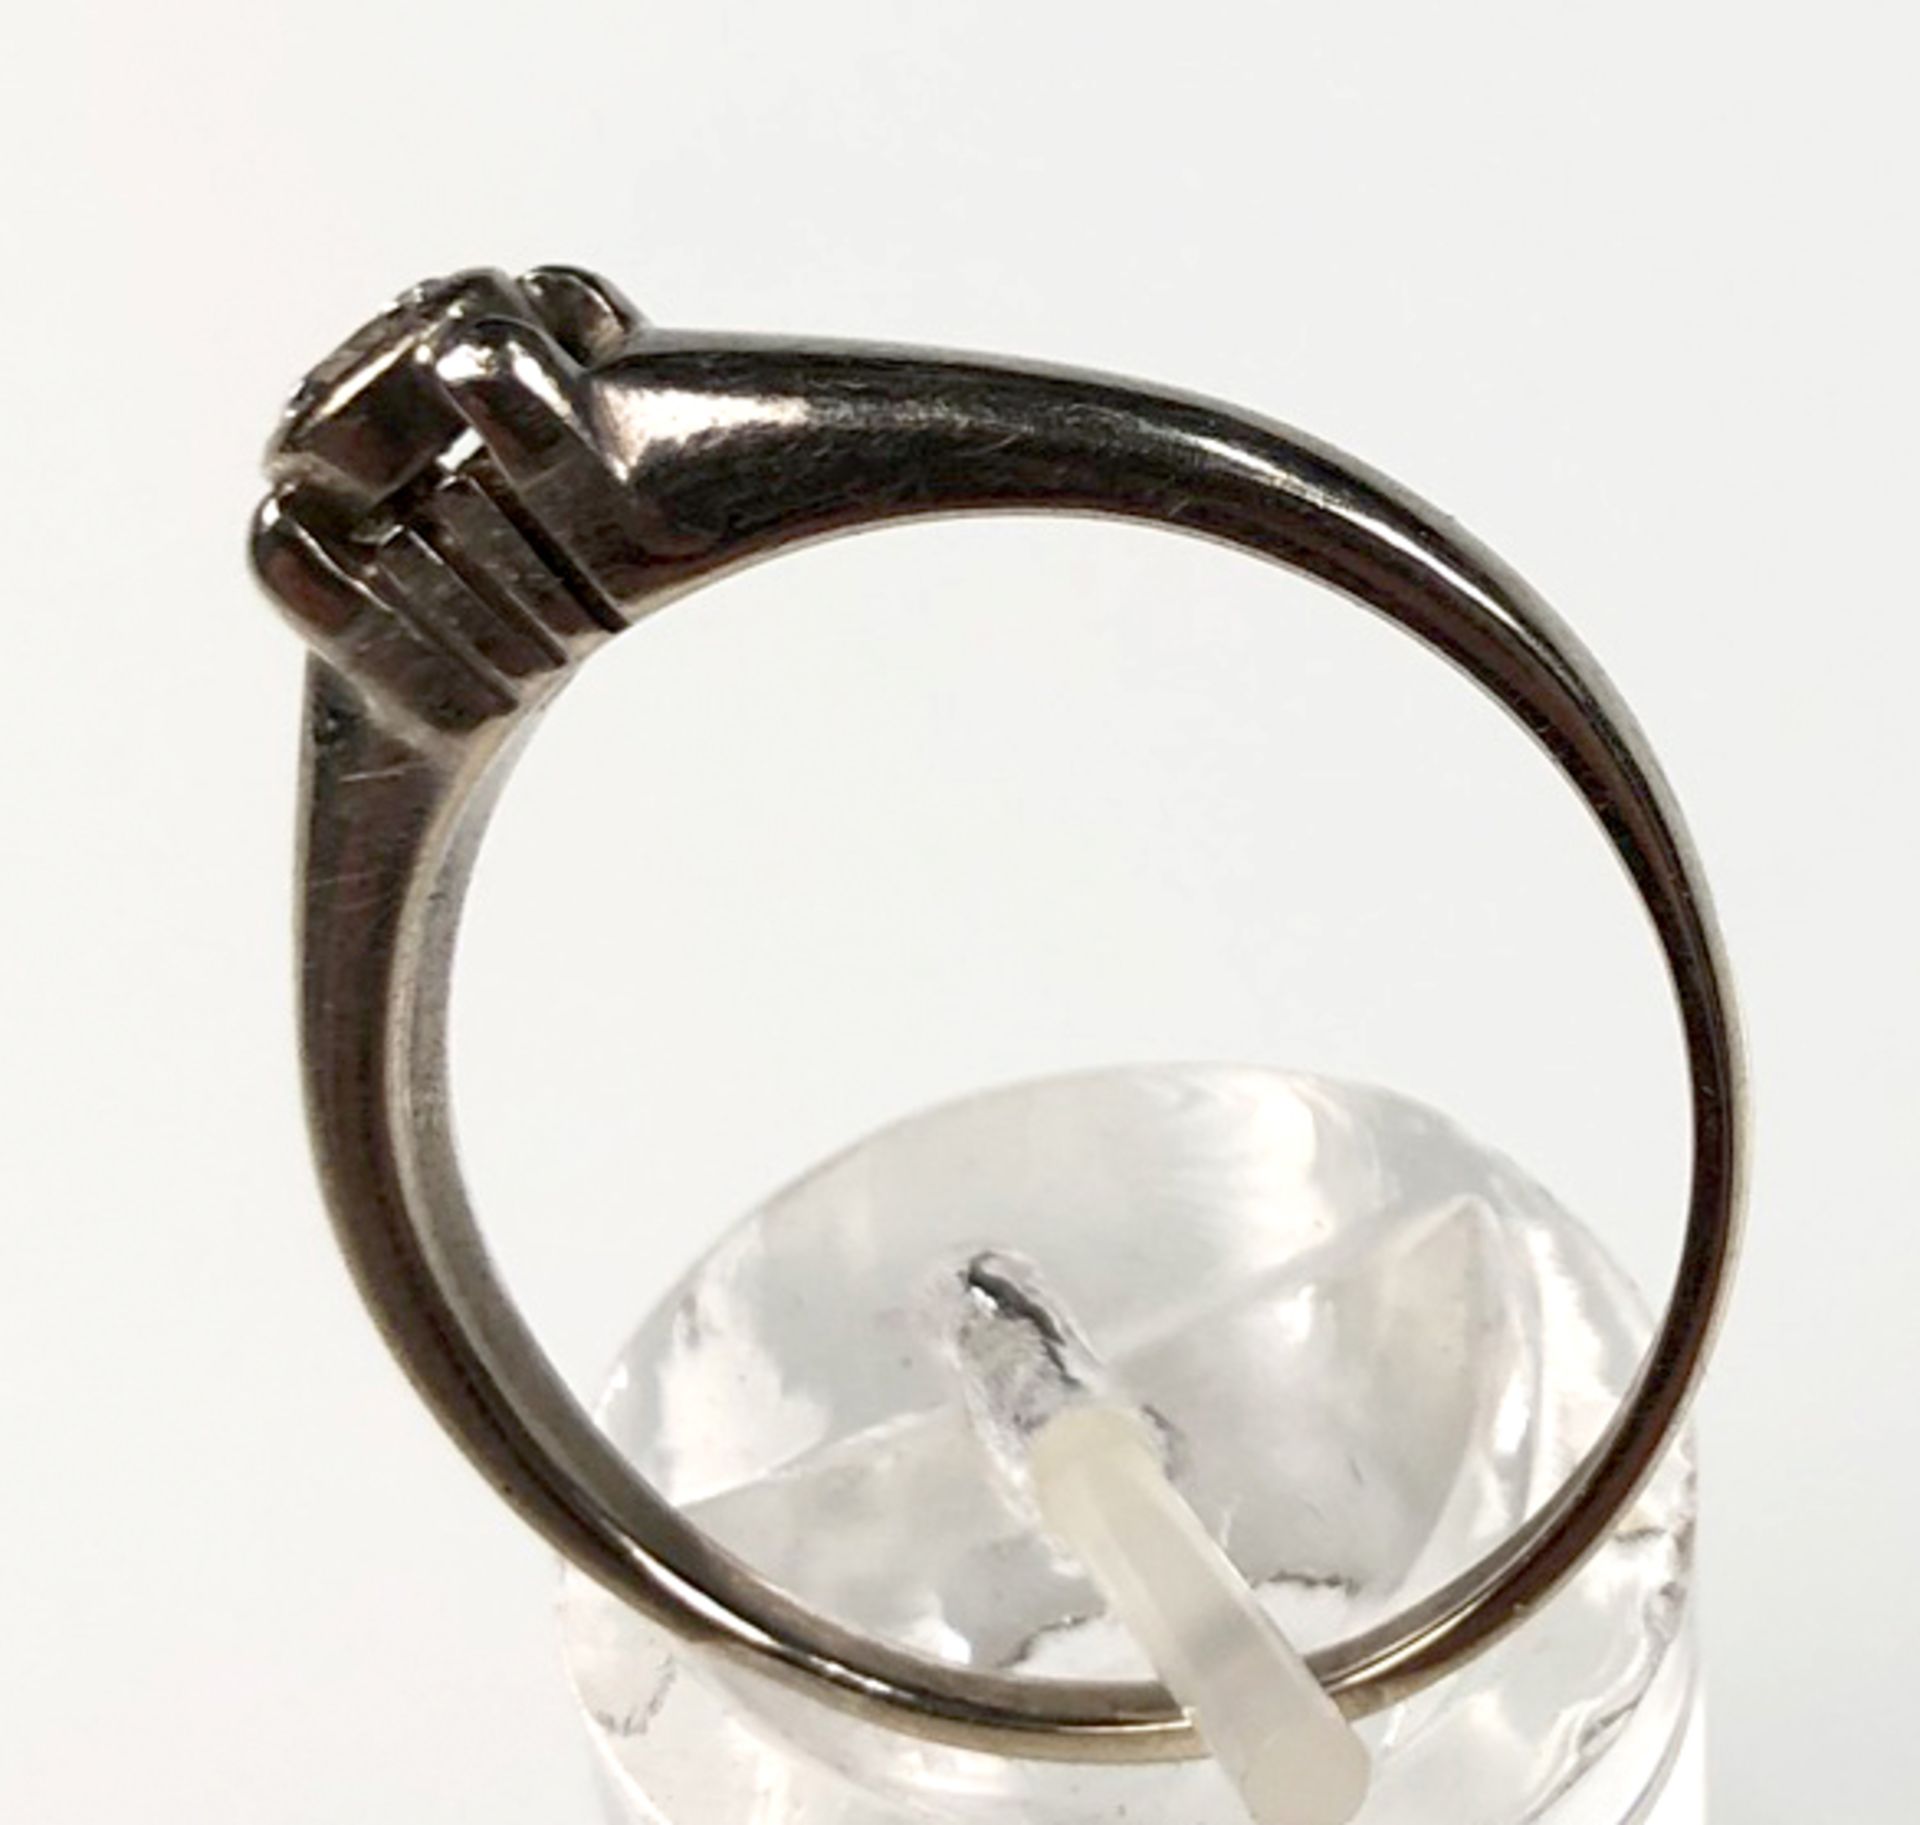 Ring white gold 585. Central old cut diamond. About 0.2 carat. - Image 4 of 9